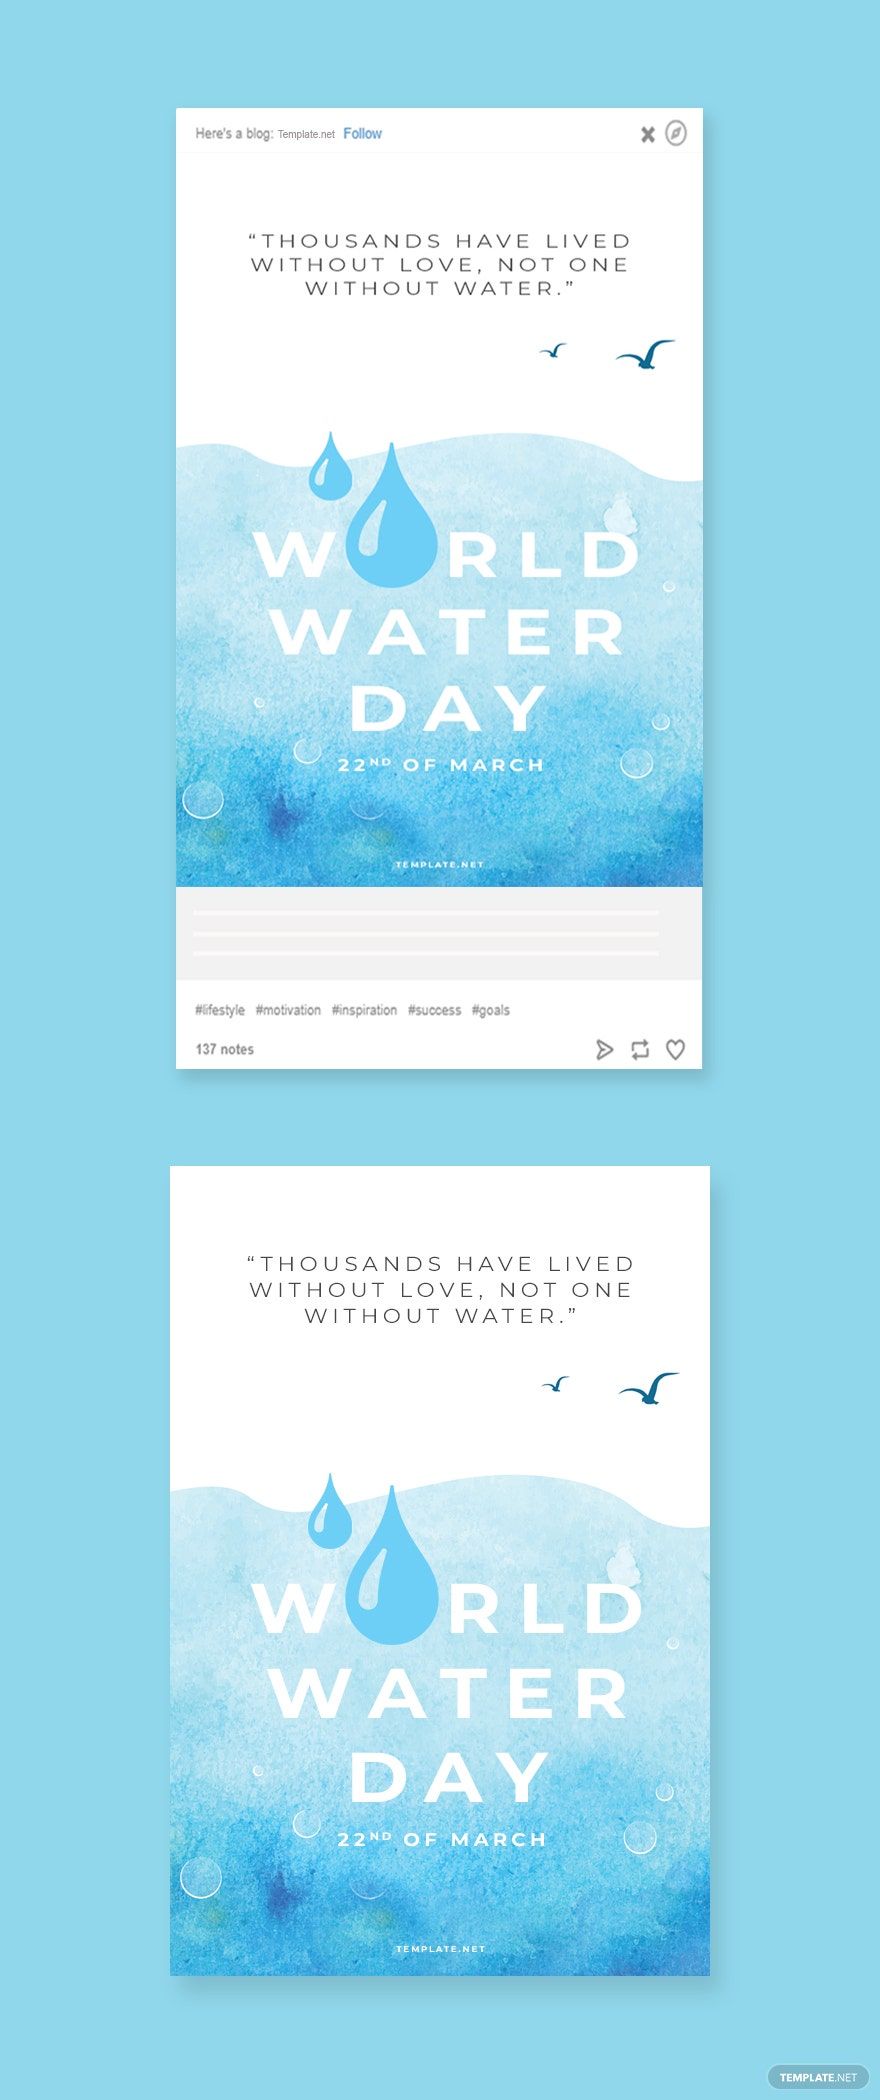 Free World Water Day Tumblr Post Template in PSD